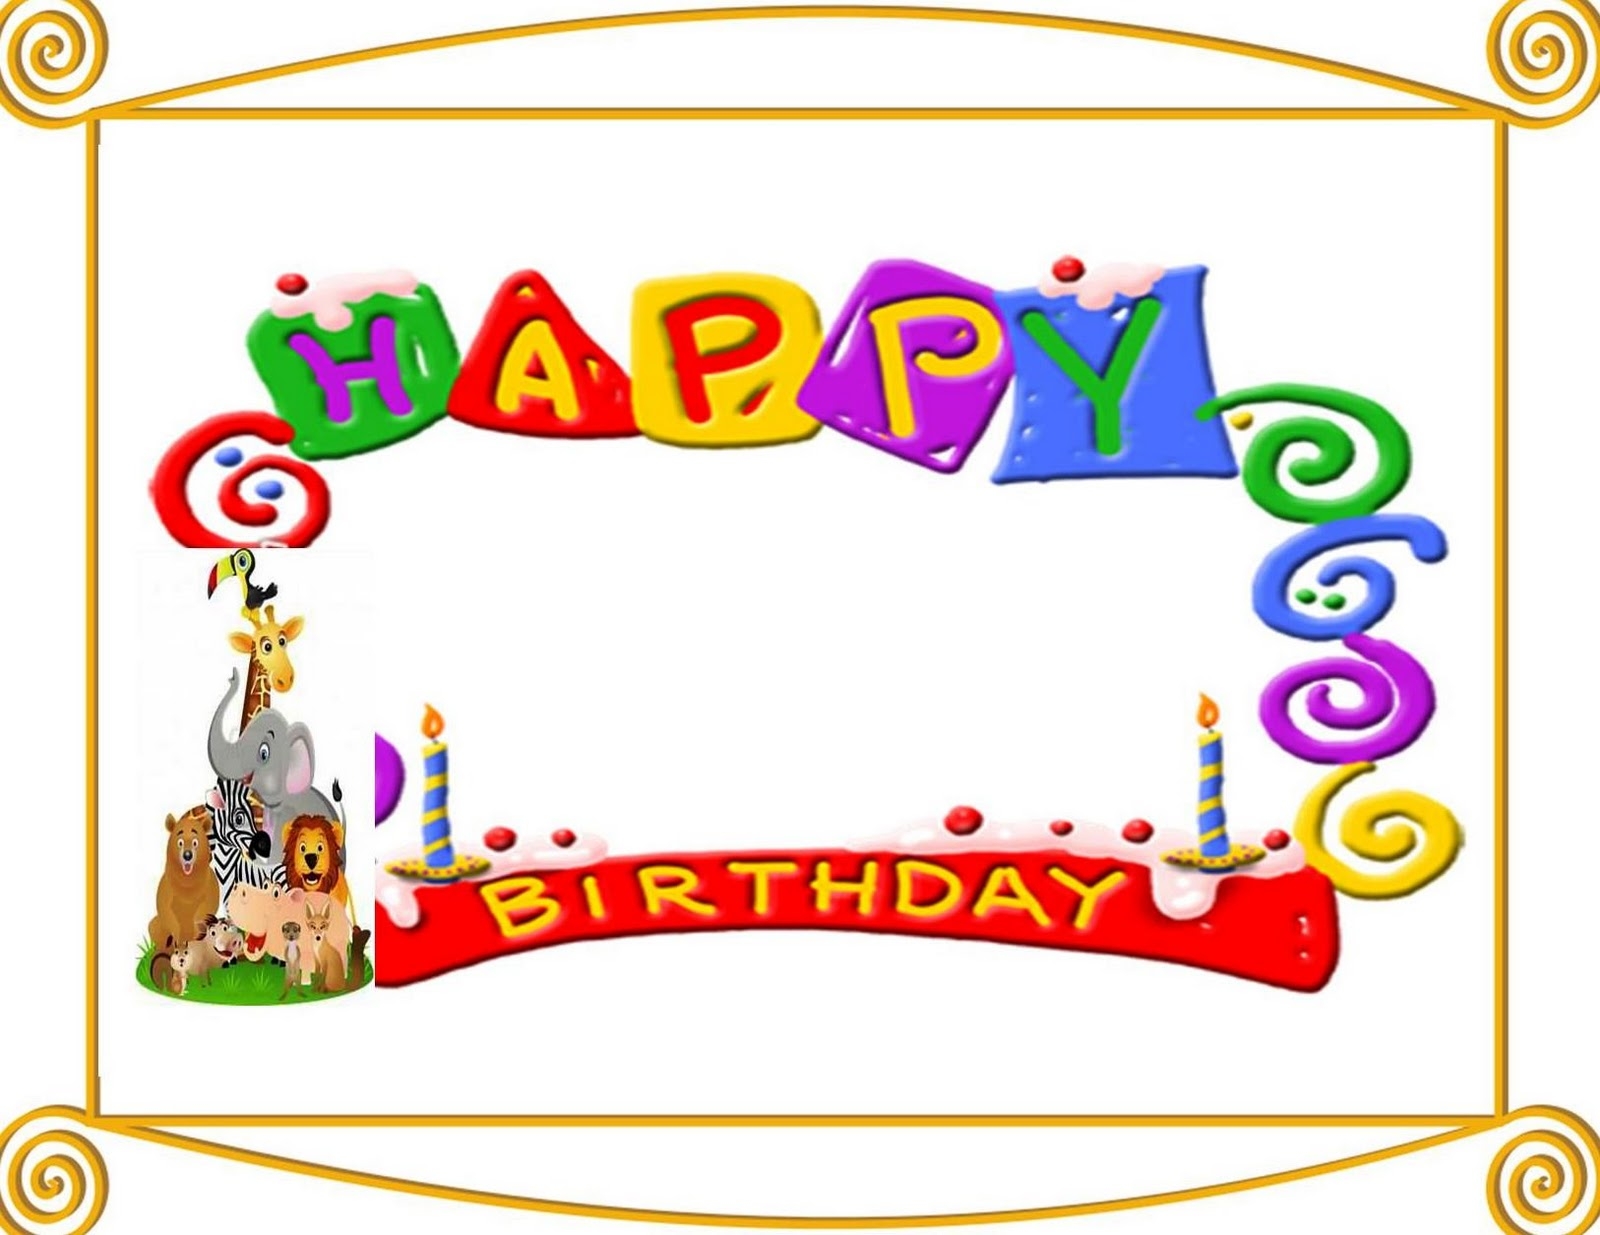 Free Birthday Card Cliparts, Download Free Clip Art, Free.